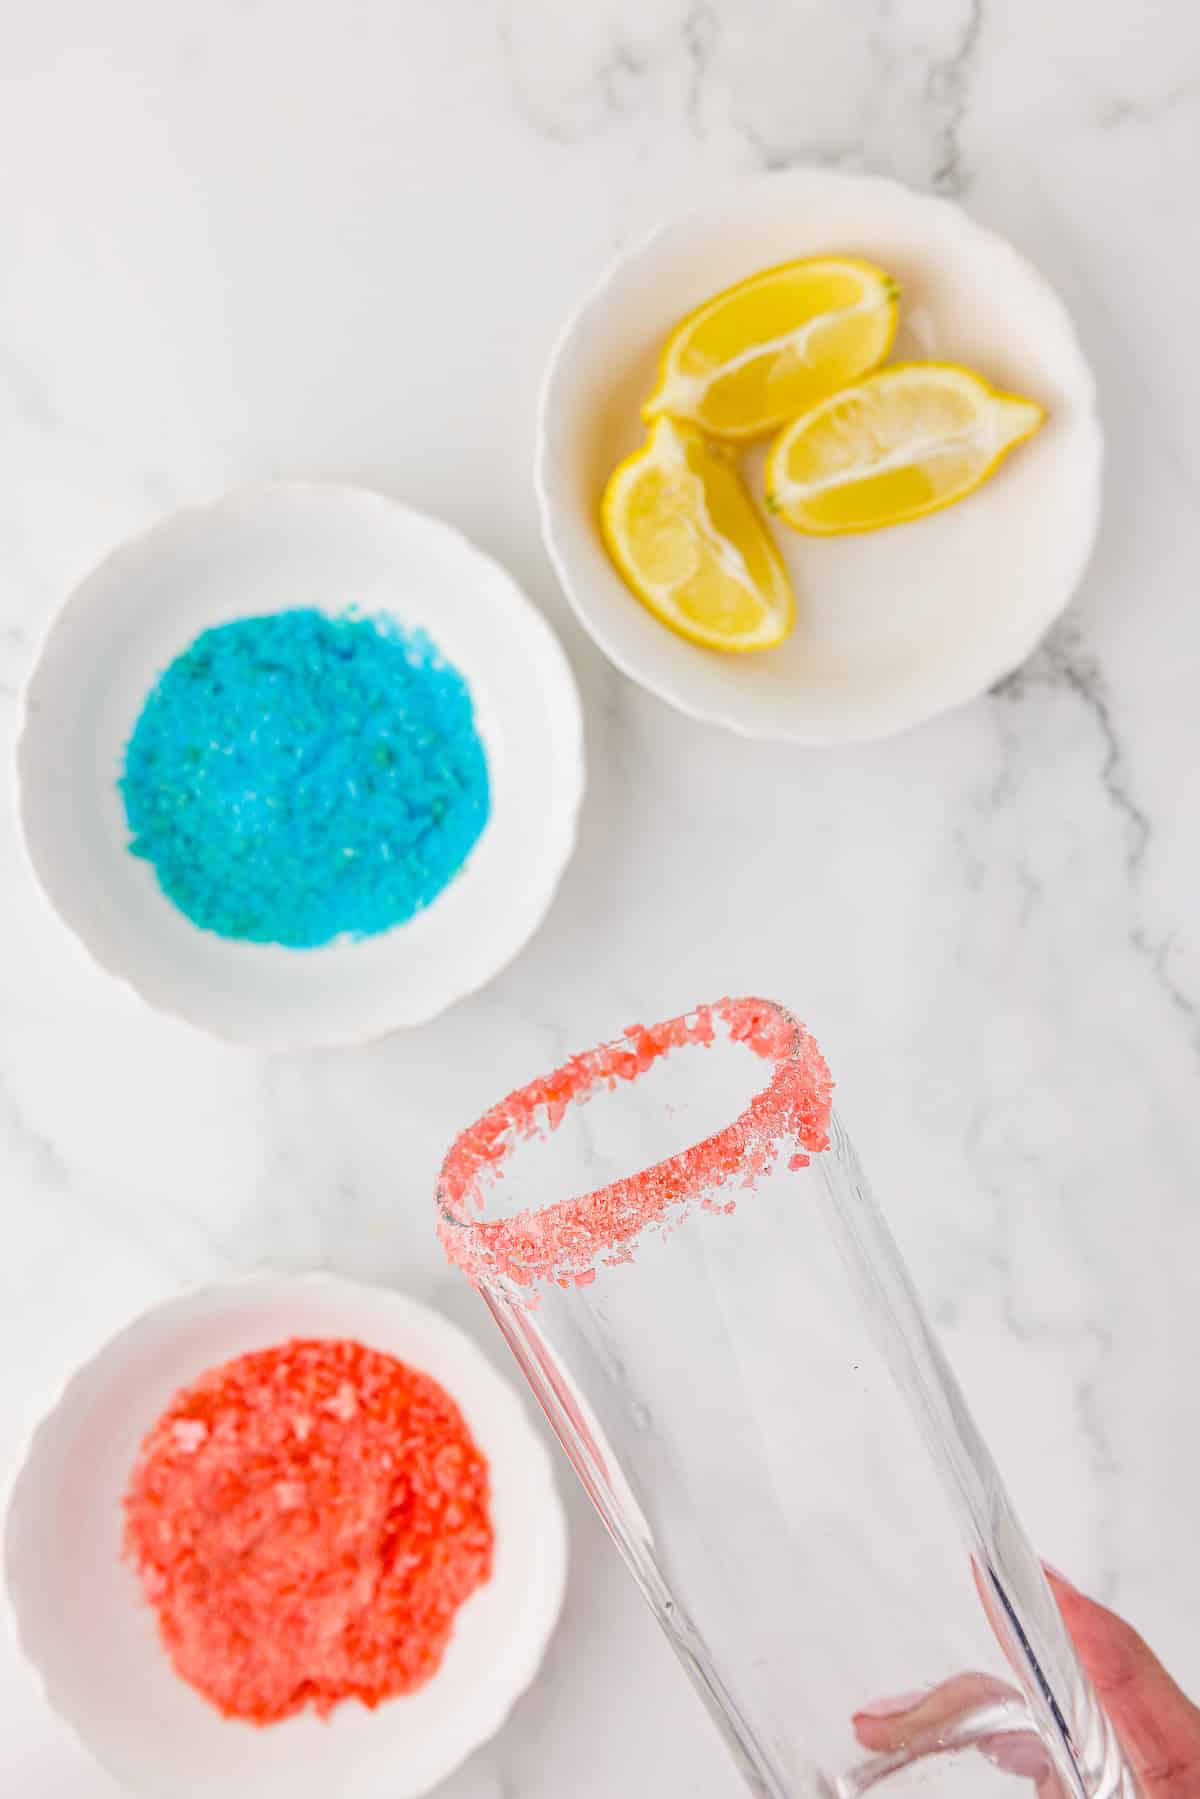 Two small white bowls of pop rock like candy, one with red candy and one with blue candy, and a small white bowl of sliced lemons, and a square glass, the upper rim of which was dipped in lemon juice and then into the red candy